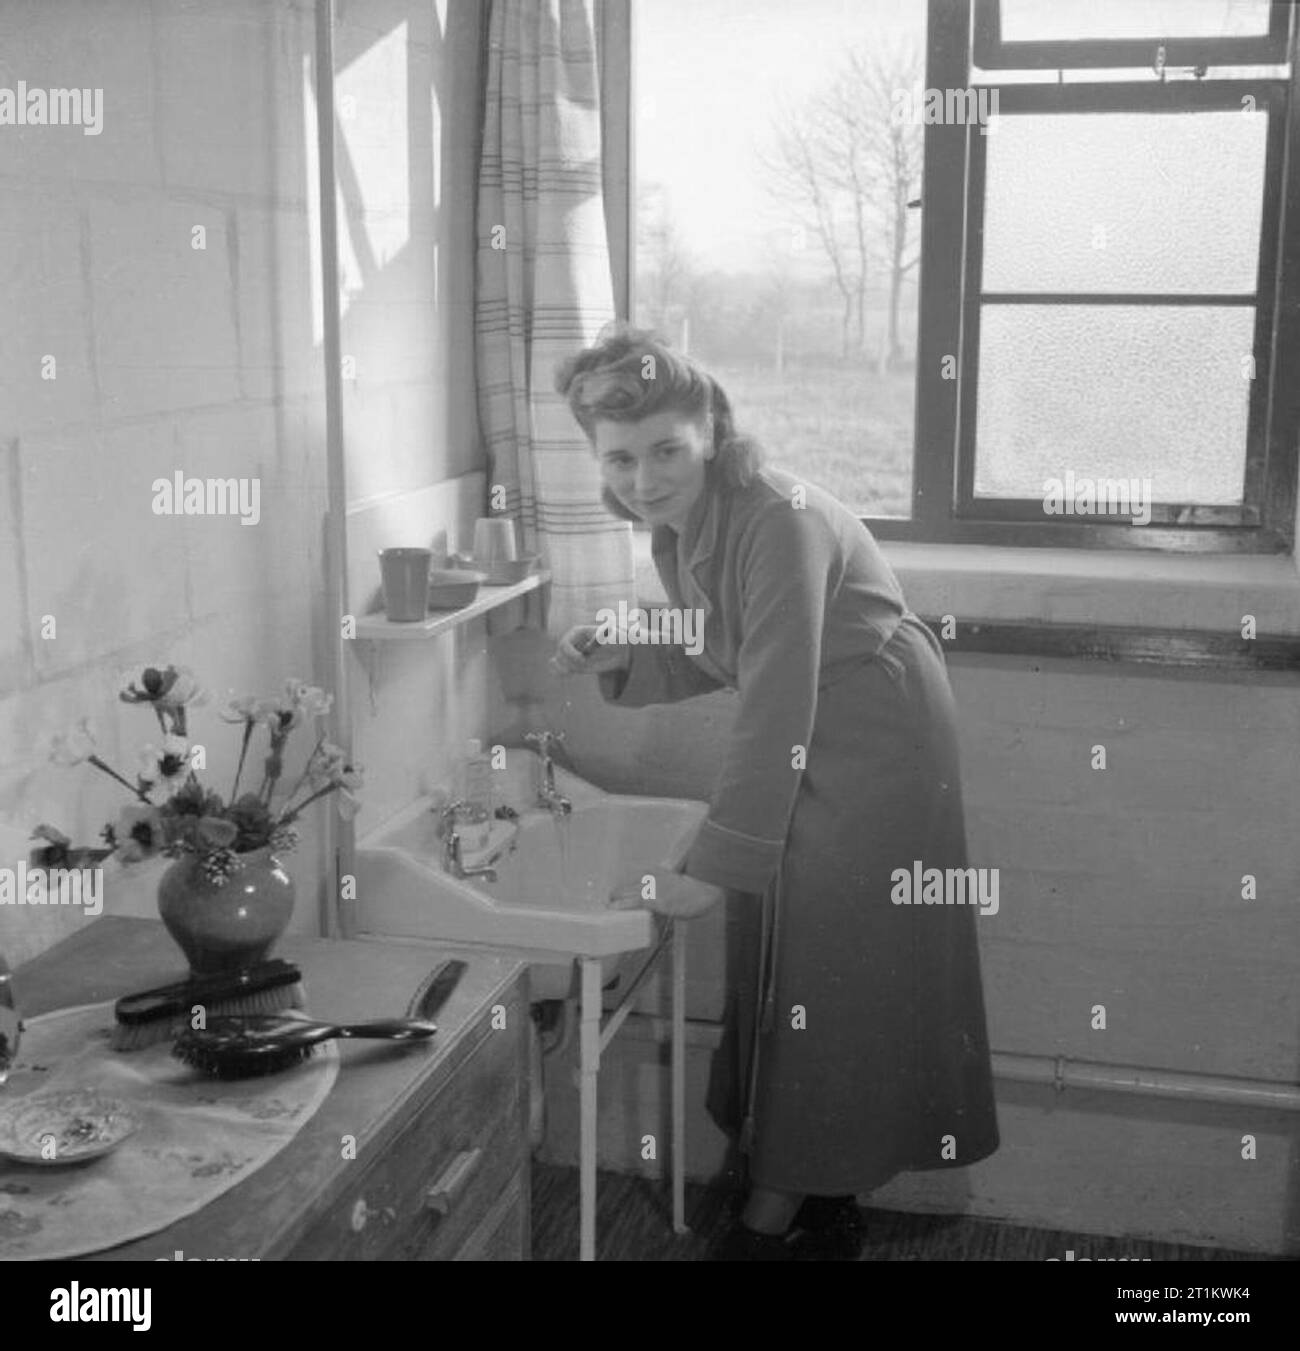 Workers Welfare at a Royal Ordnance Factory- Life at Rof Bridgend, January 1942 A female war worker cleans her teeth in the bedroom she shares with another woman in the war workers hostel at ROF Bridgend. According to the original caption, hot and cold water and central heating were laid on in all the rooms. Stock Photo